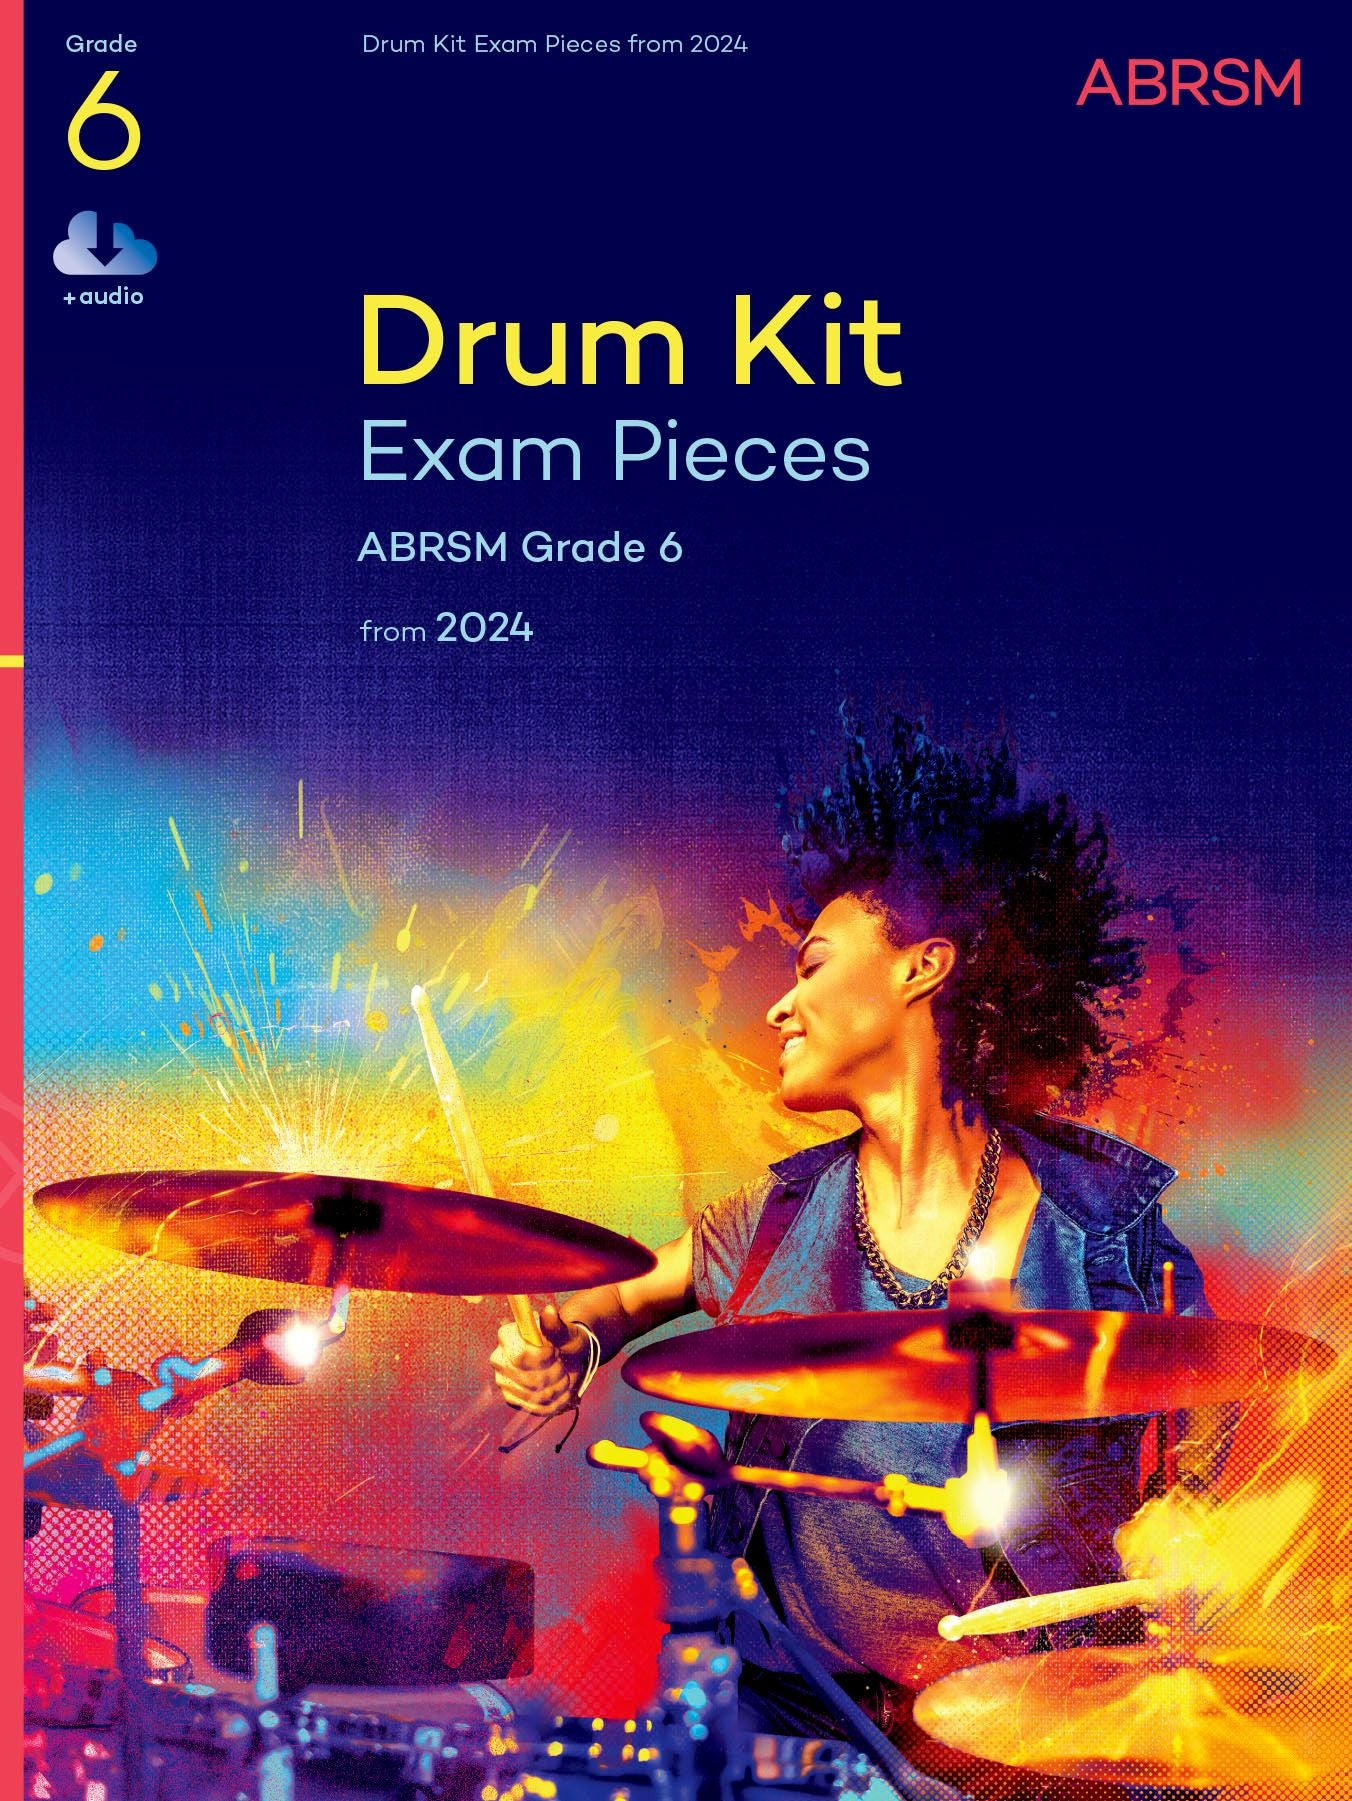 ABRSM Drum Kit Exam Pieces Grade 6 from 2024 (w/ Audio)